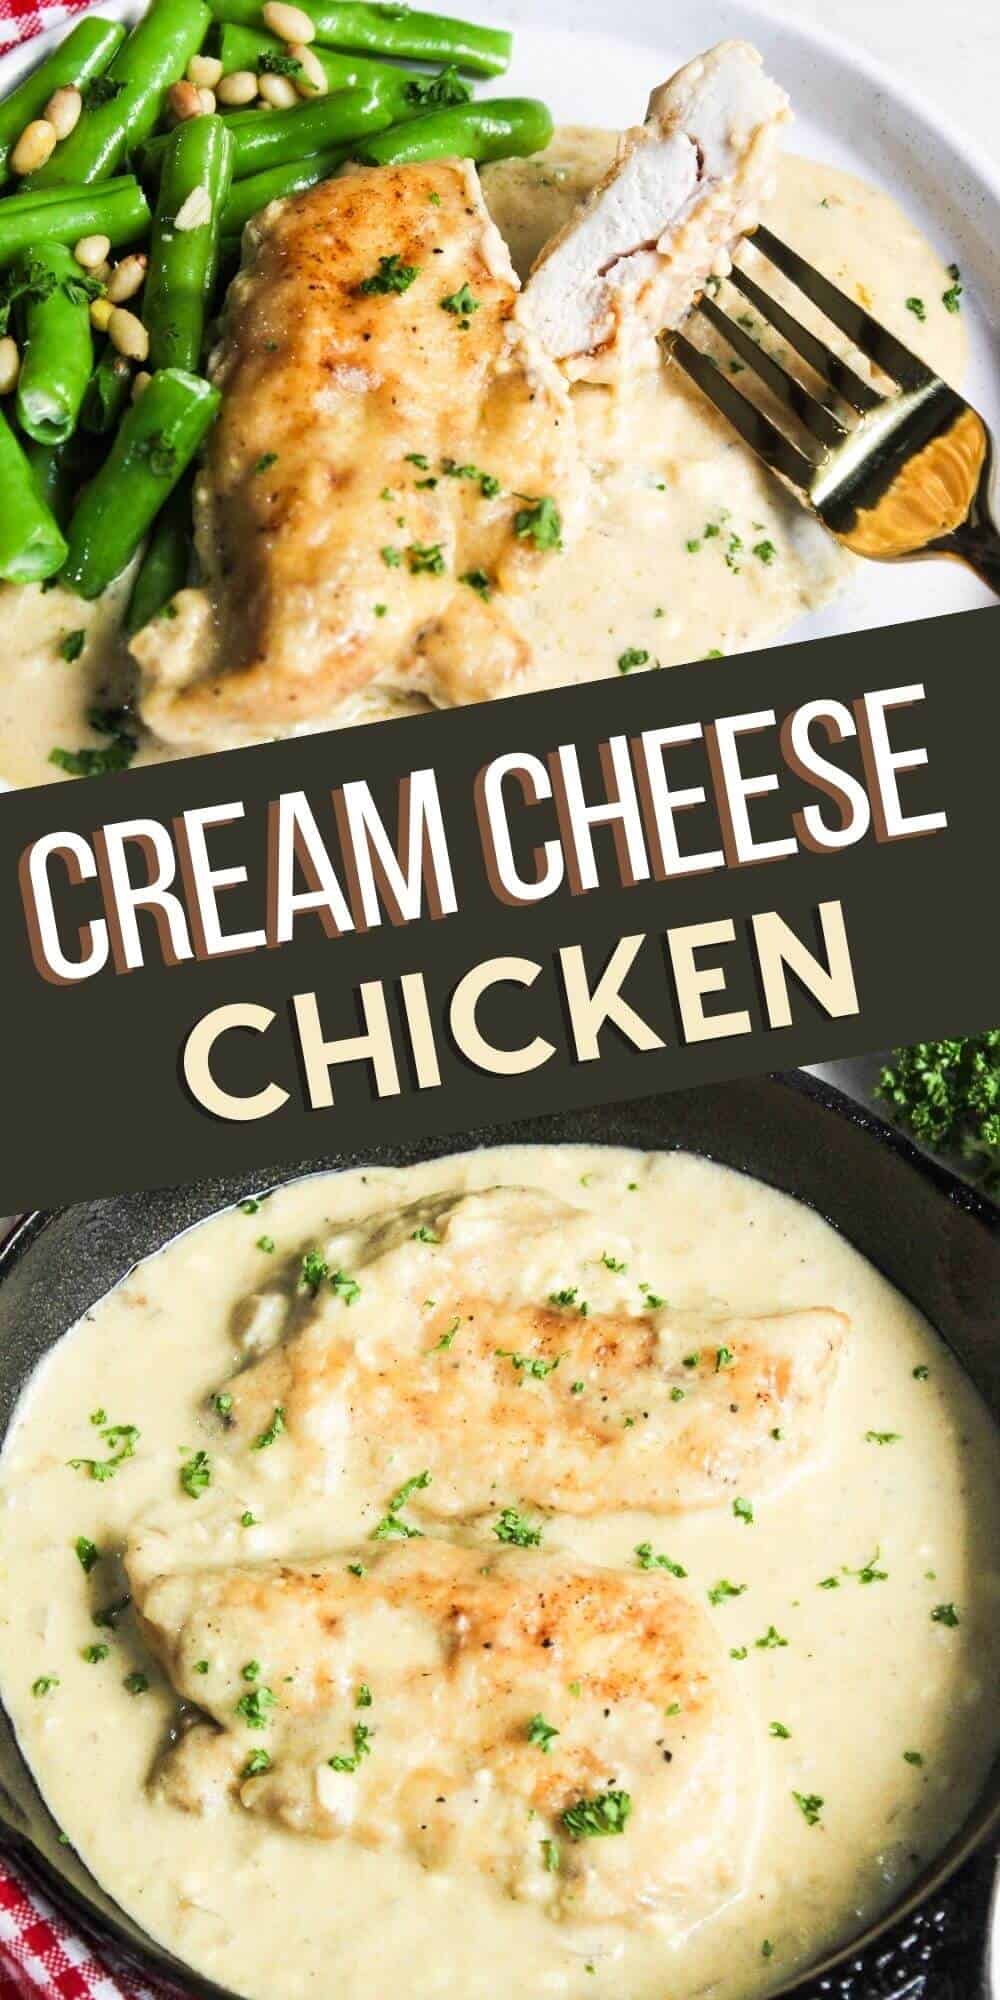 Cream cheese chicken in a skillet with green beans.